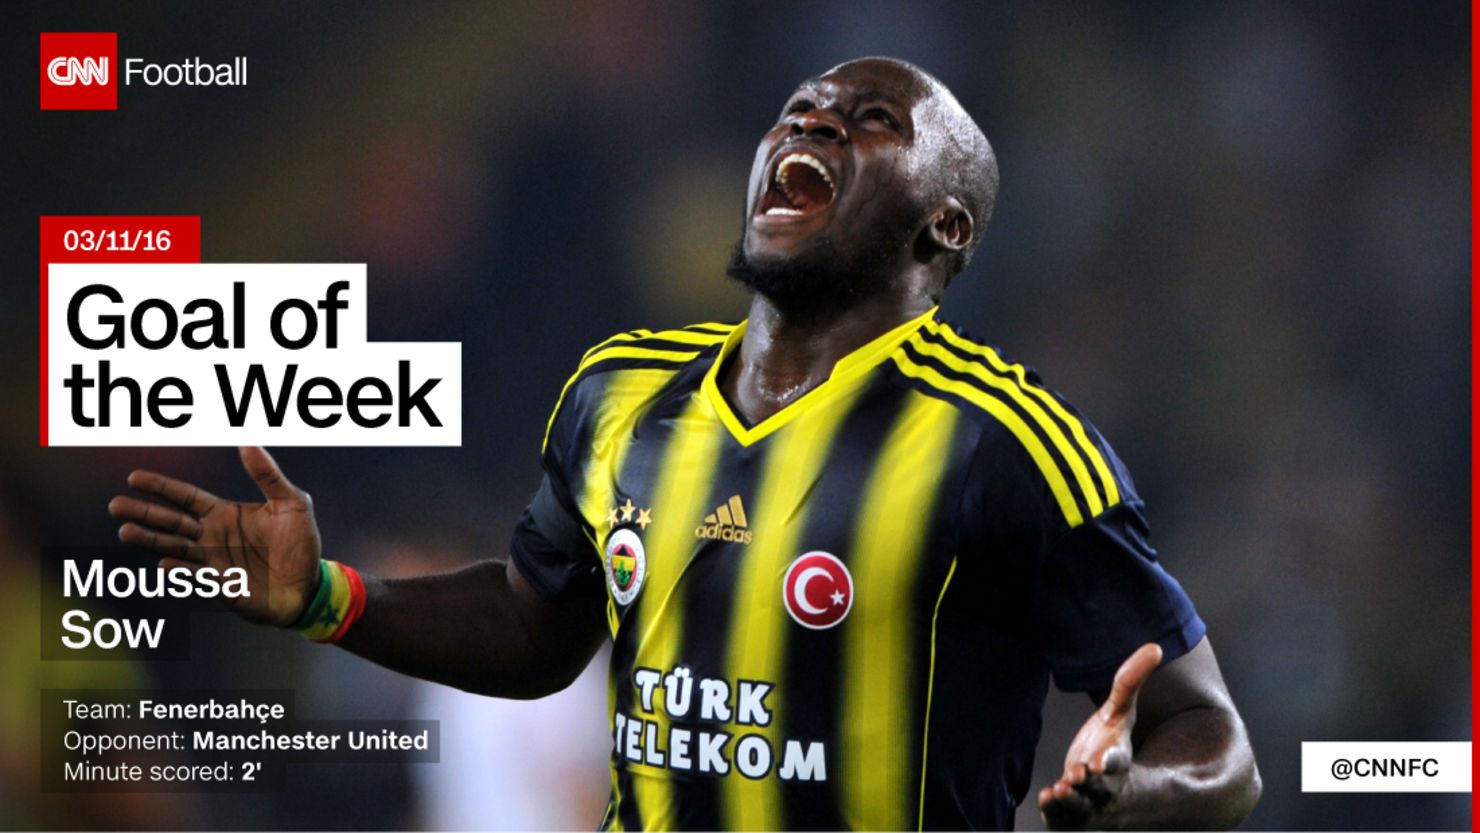 Moussa Sow cnn goal of the week